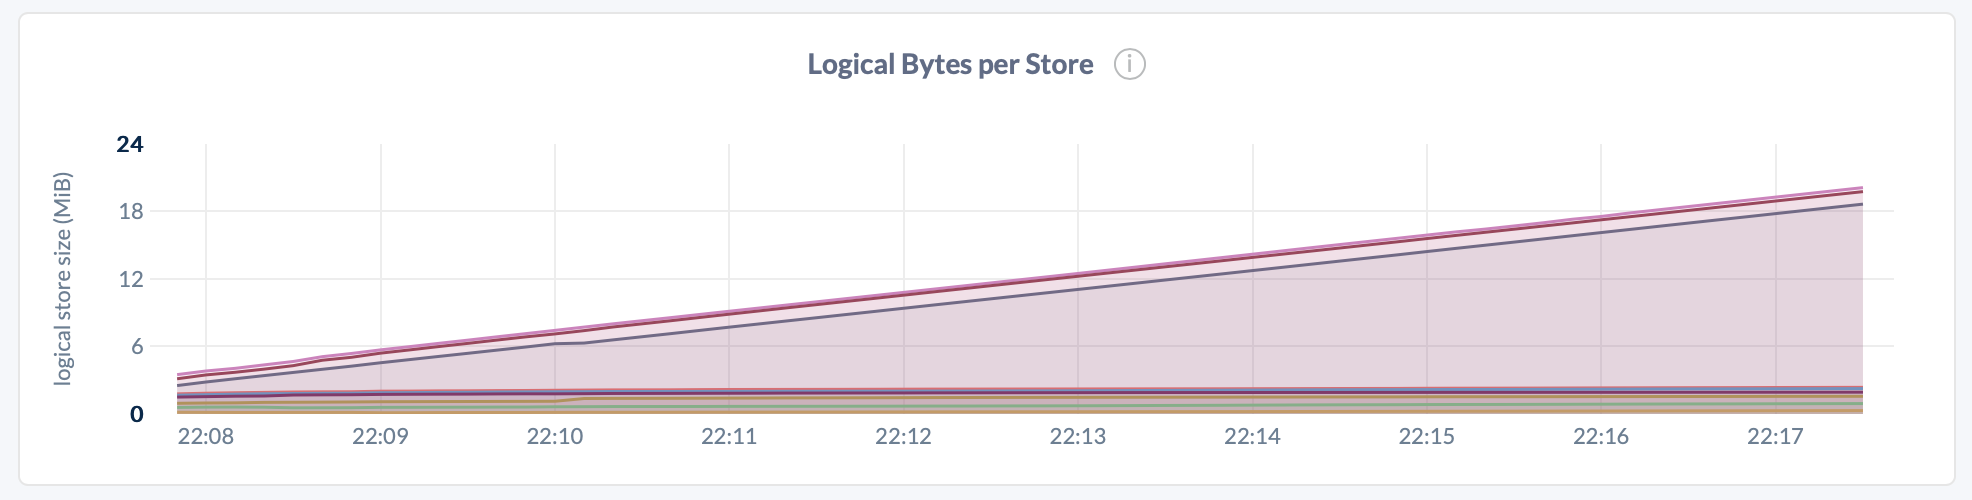 DB Console Logical Bytes per Store